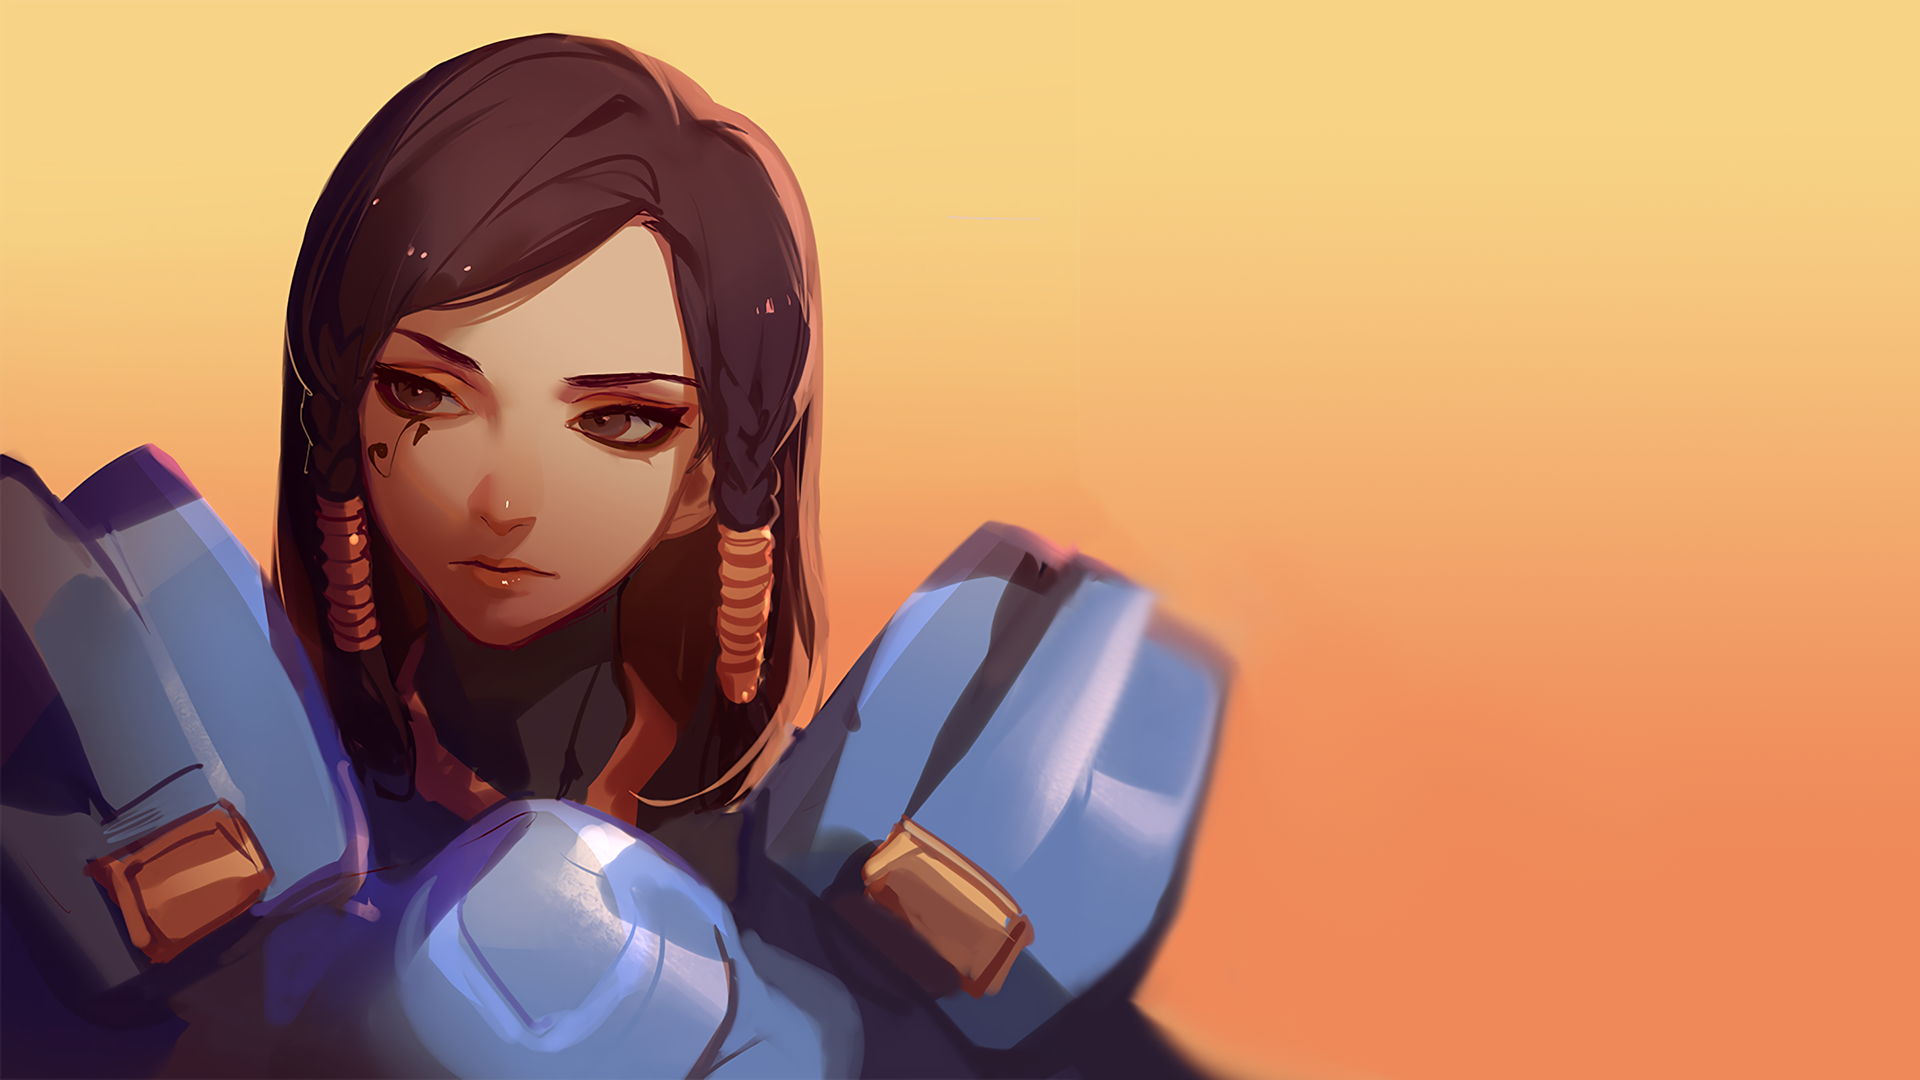 Anime 1920x1080 Overwatch video game characters Pharah (Overwatch)